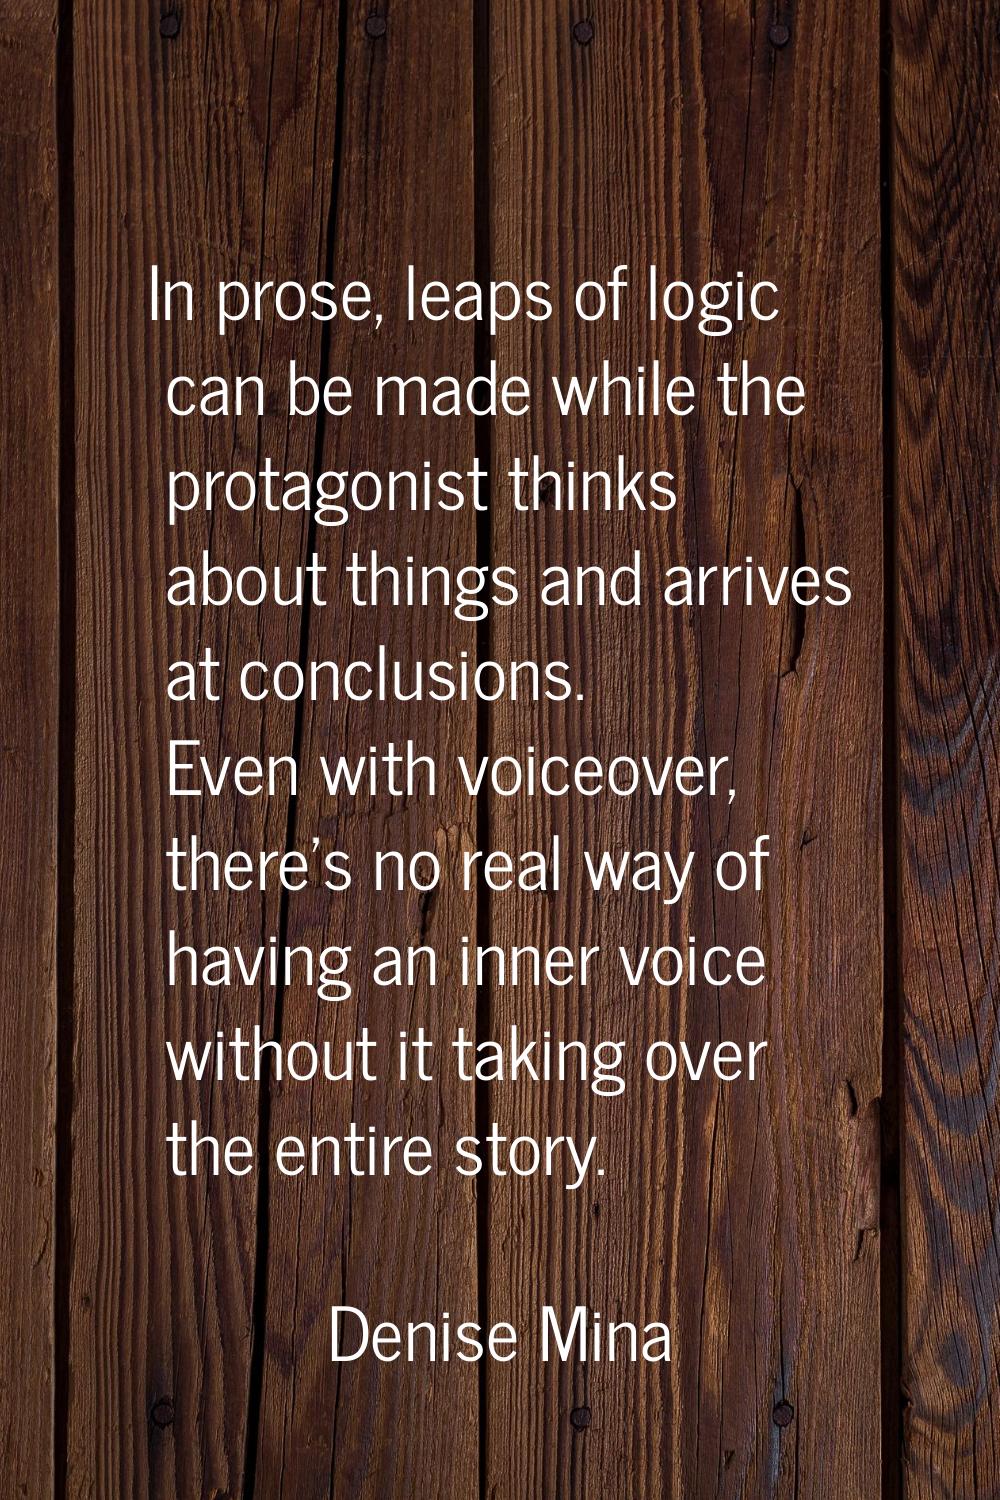 In prose, leaps of logic can be made while the protagonist thinks about things and arrives at concl